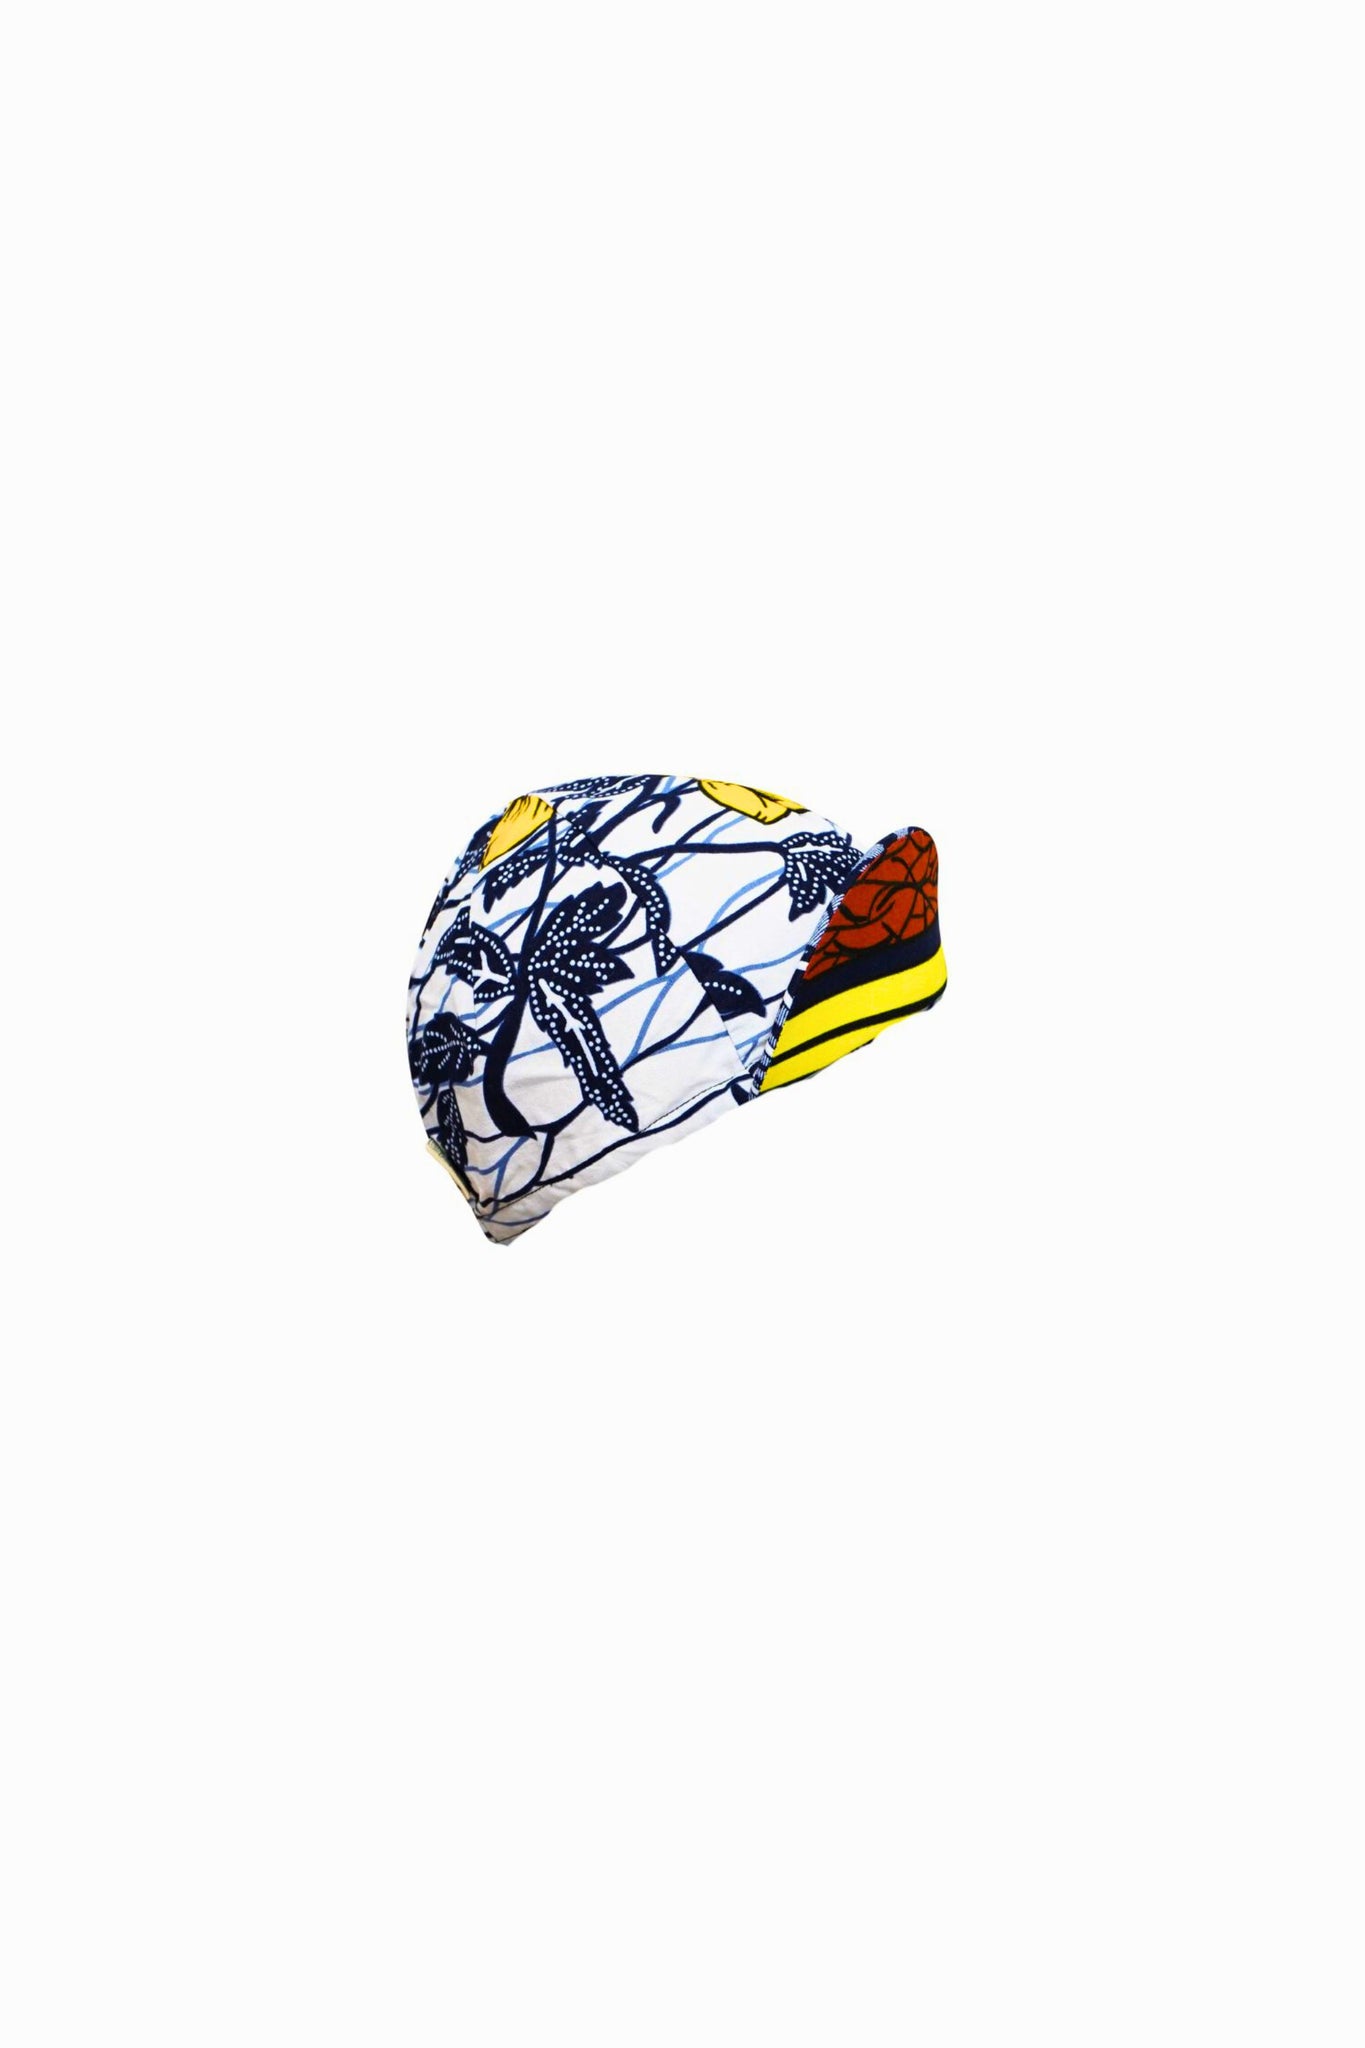 Colorful cycling cap - White Blue Brown and Yellow African Ankara Wax Cotton Print - 10